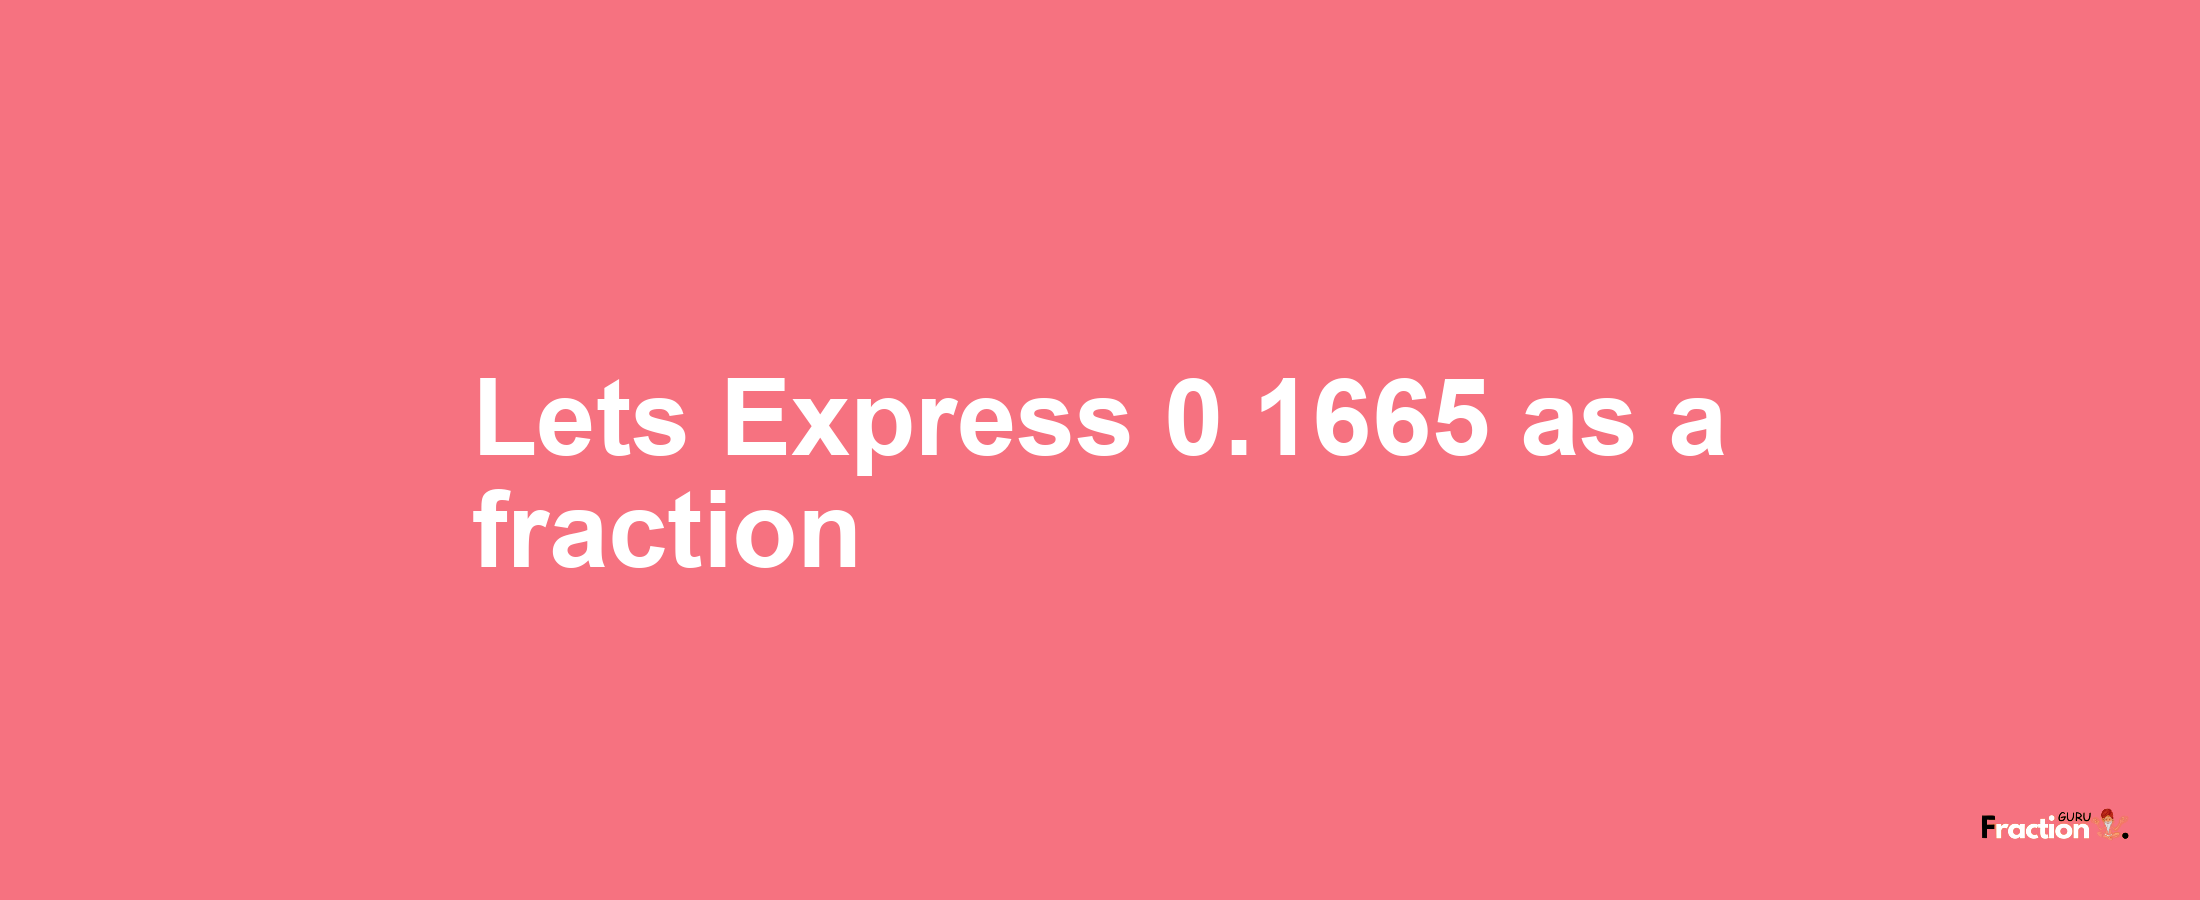 Lets Express 0.1665 as afraction